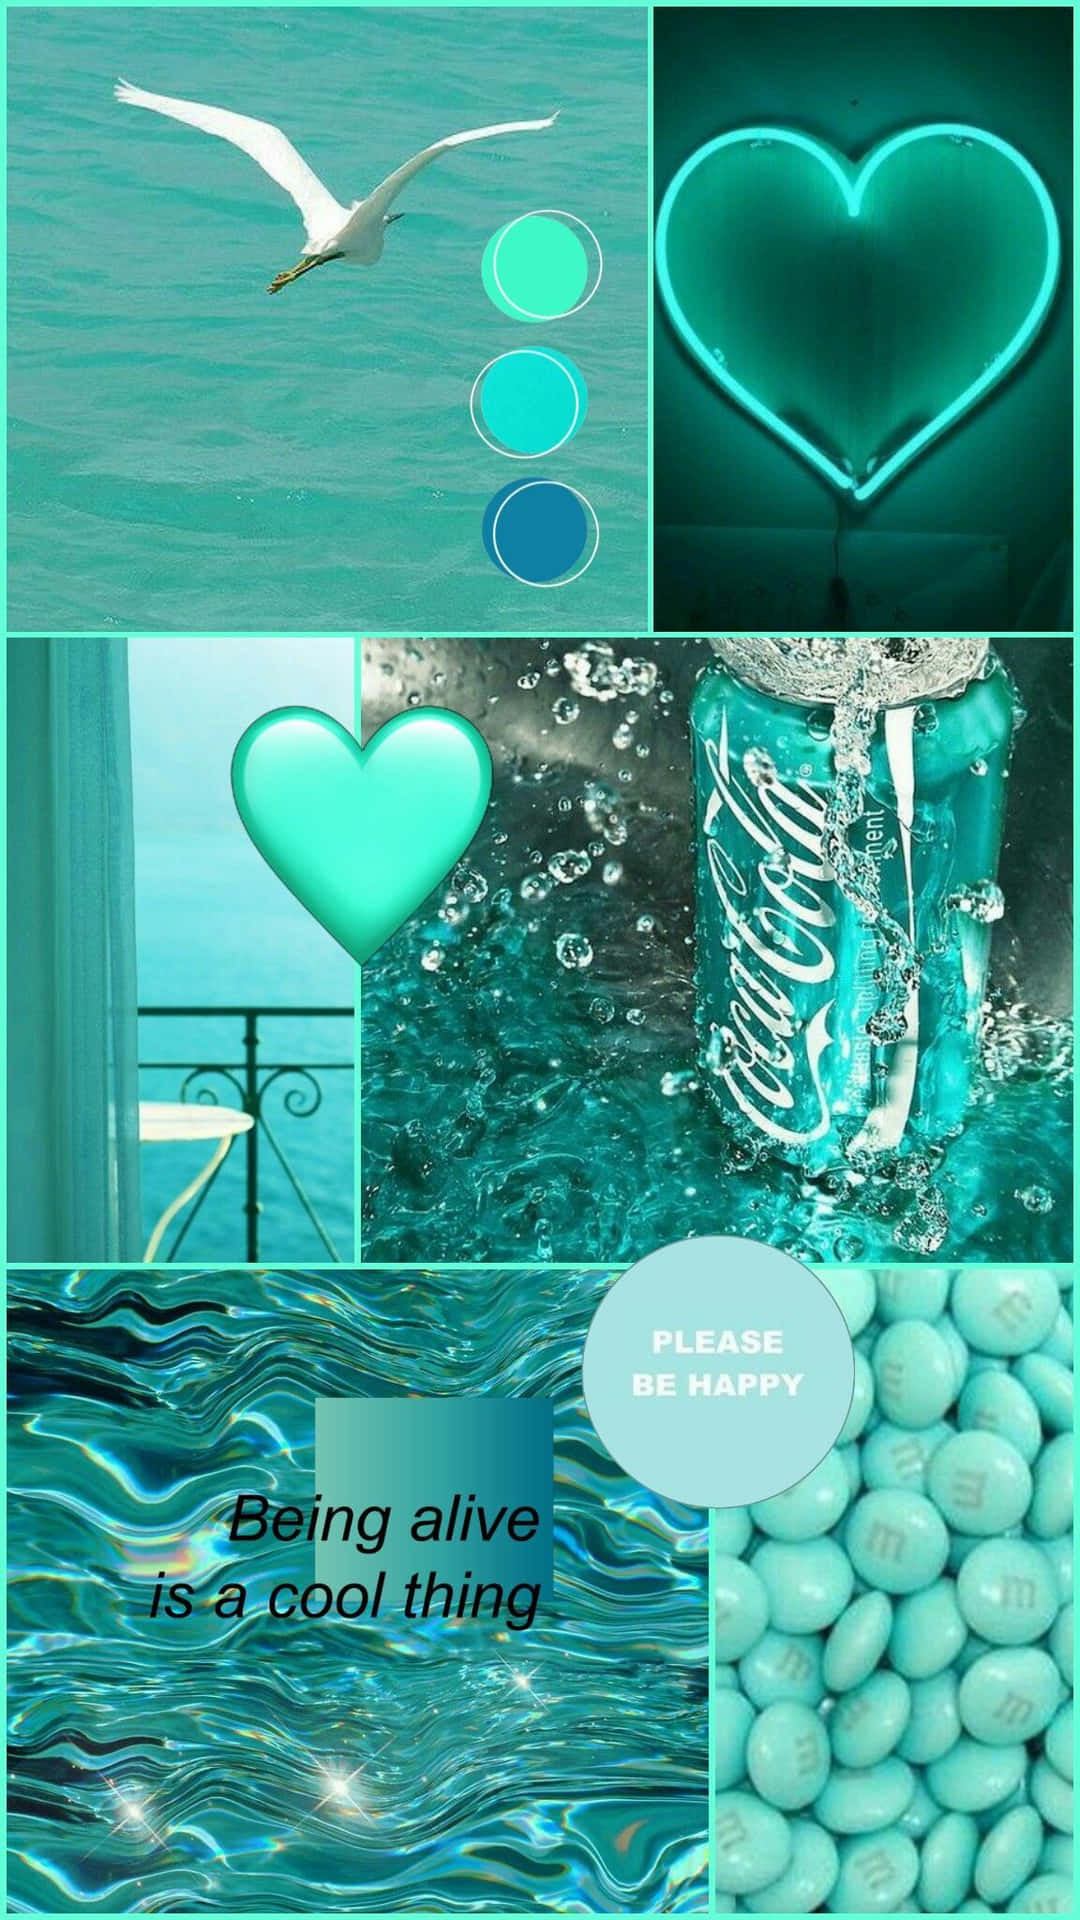 Experience life in beautiful turquoise Wallpaper